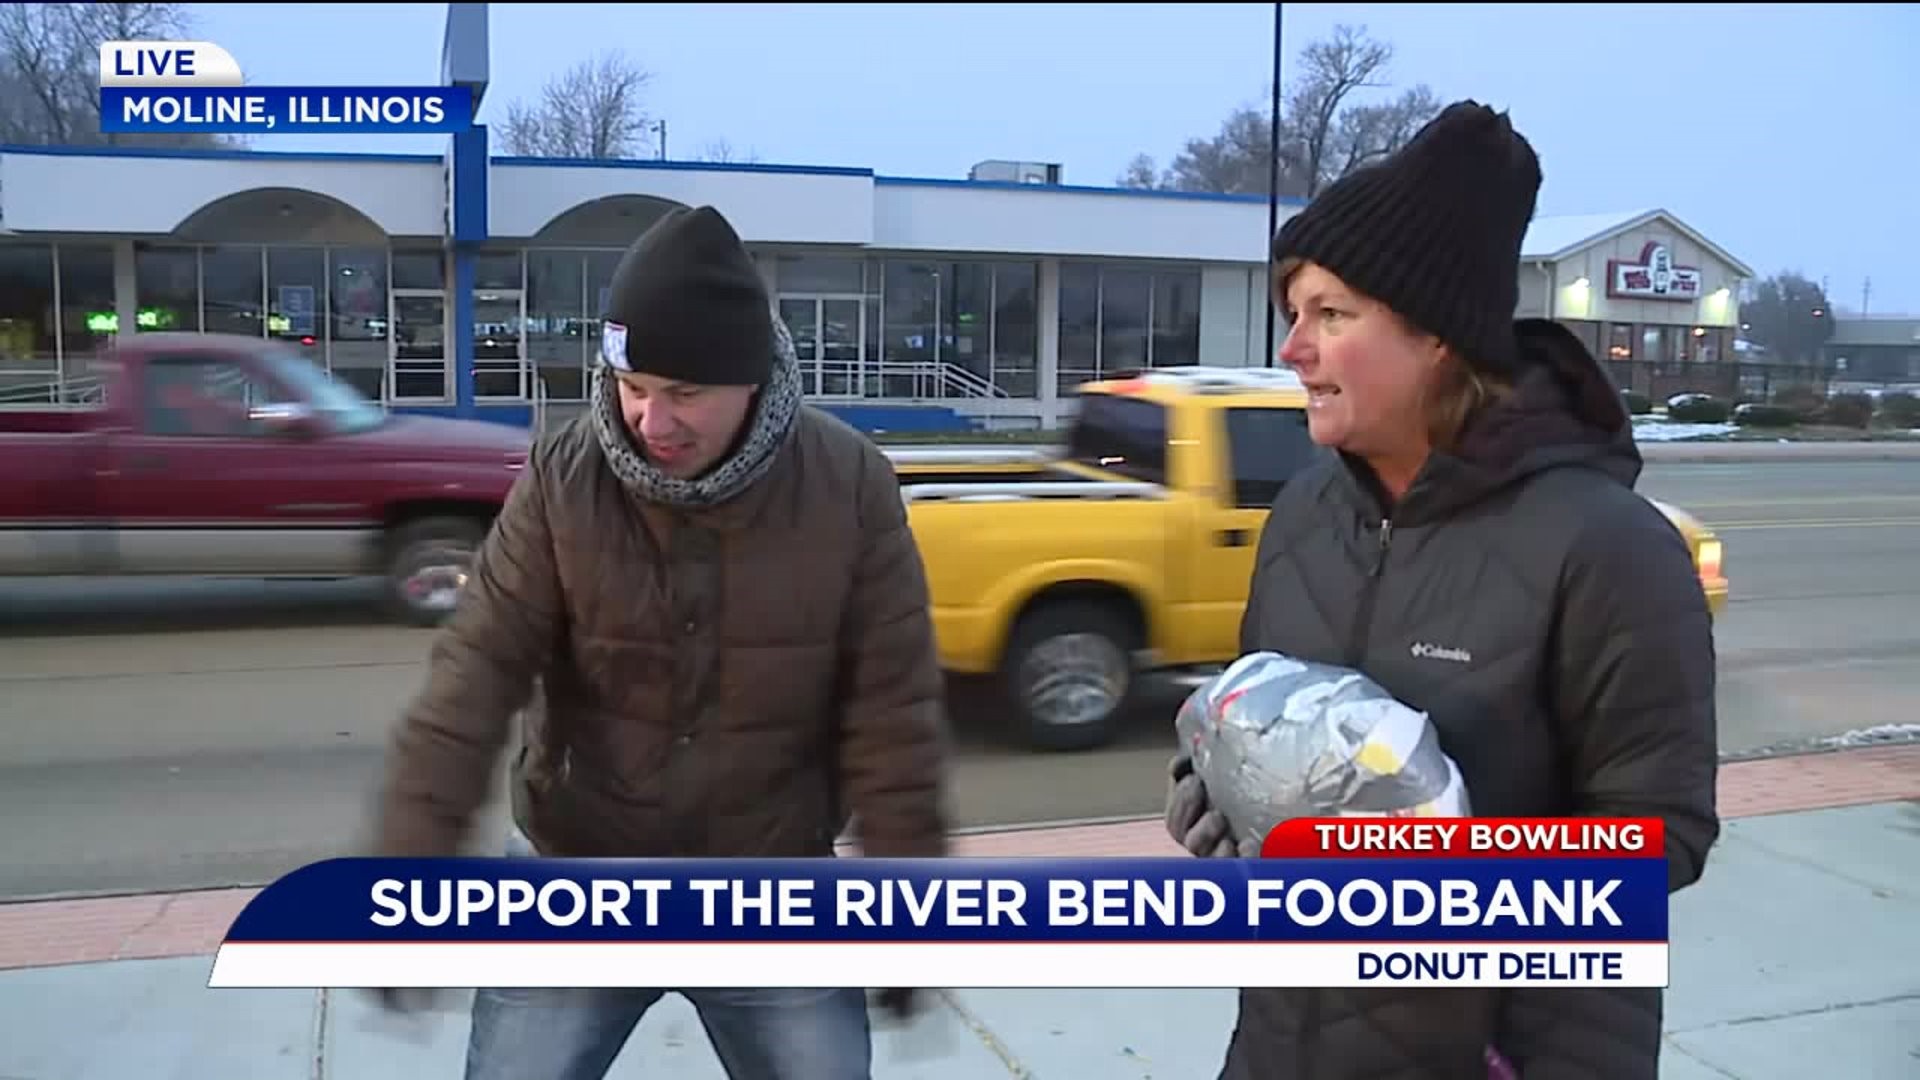 Suporting the River Bend Foodbank